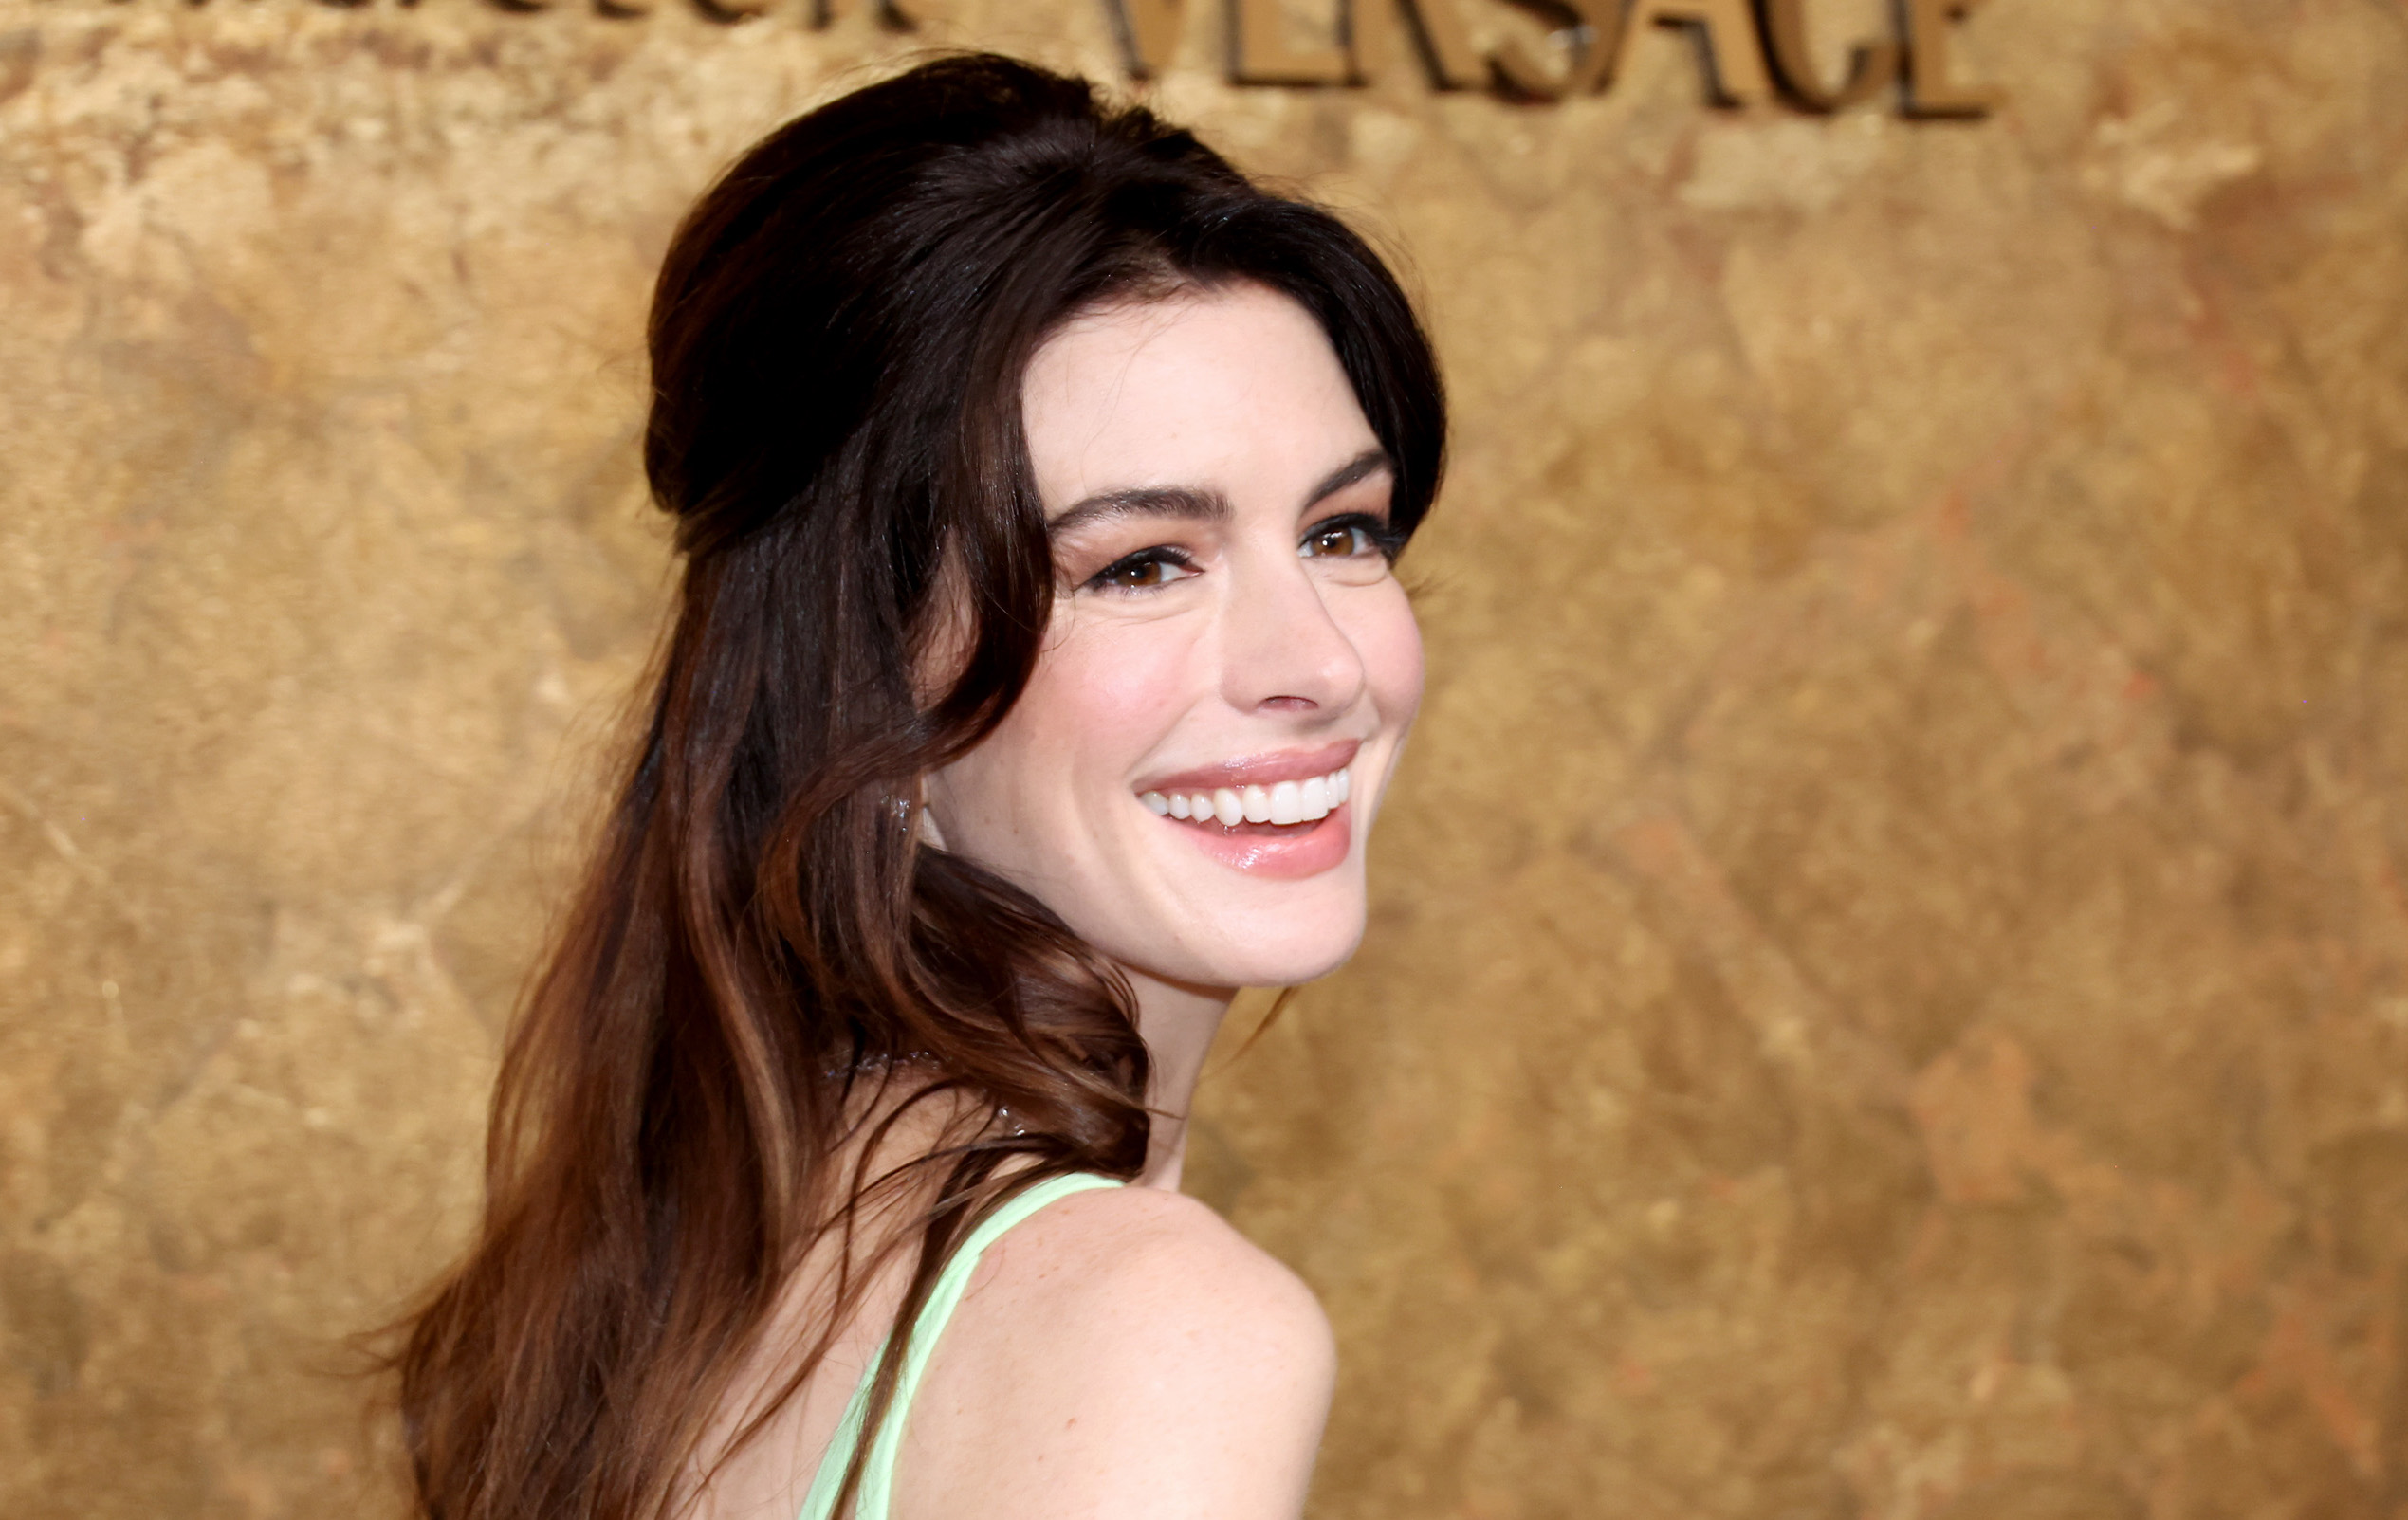 Anne Hathaway Says She Was Asked To ‘Make Out’ With 10 Potential Co-Stars In 1 Day ‘To Test For Chemistry’